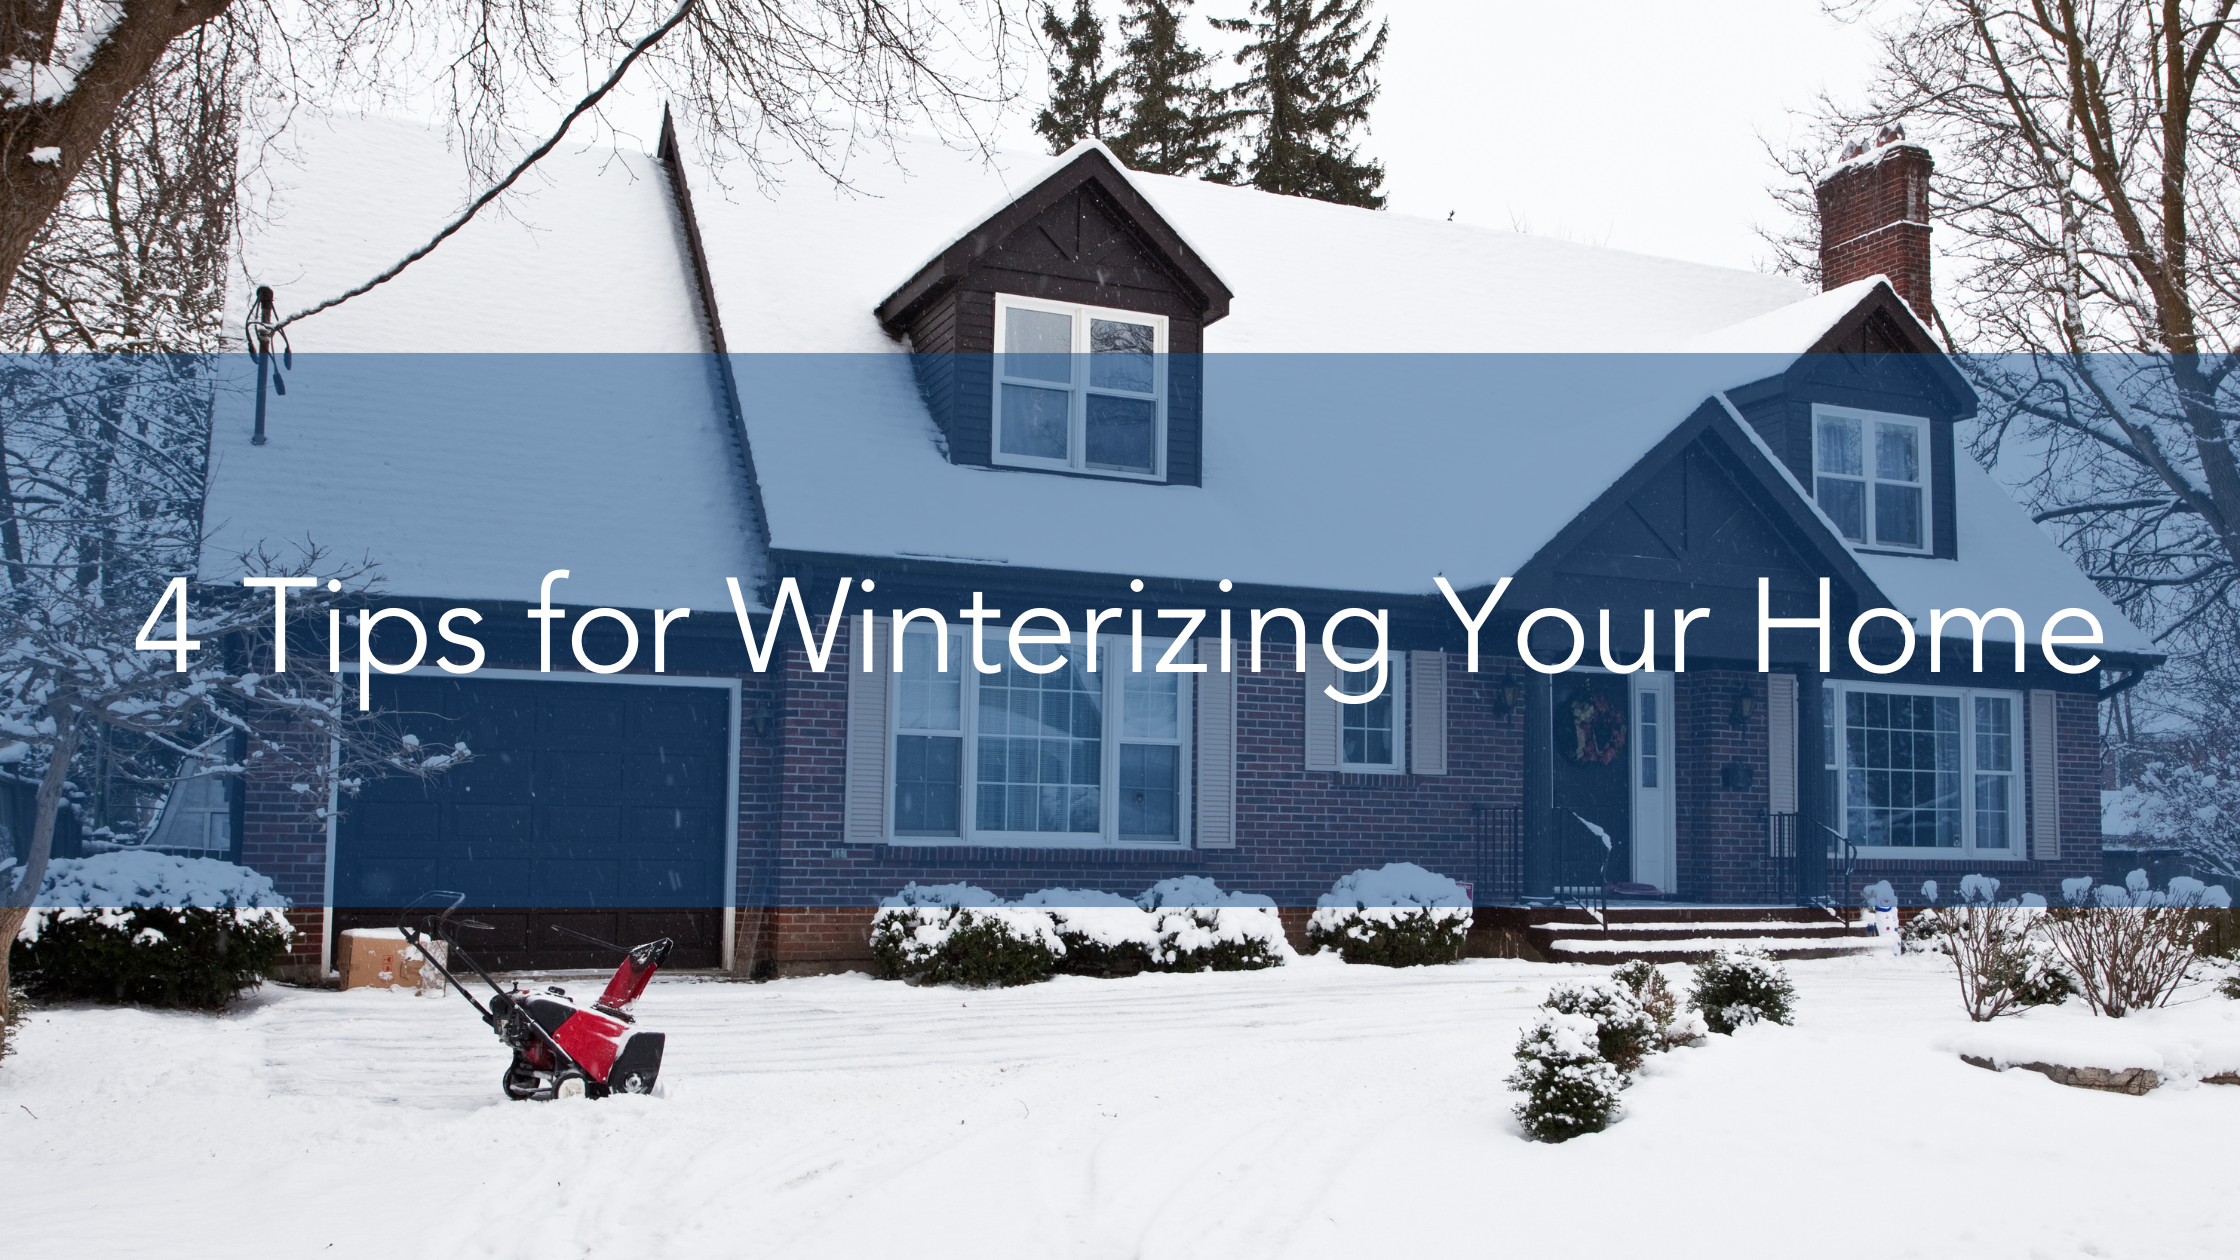 4 Tips for Winterizing Your Home